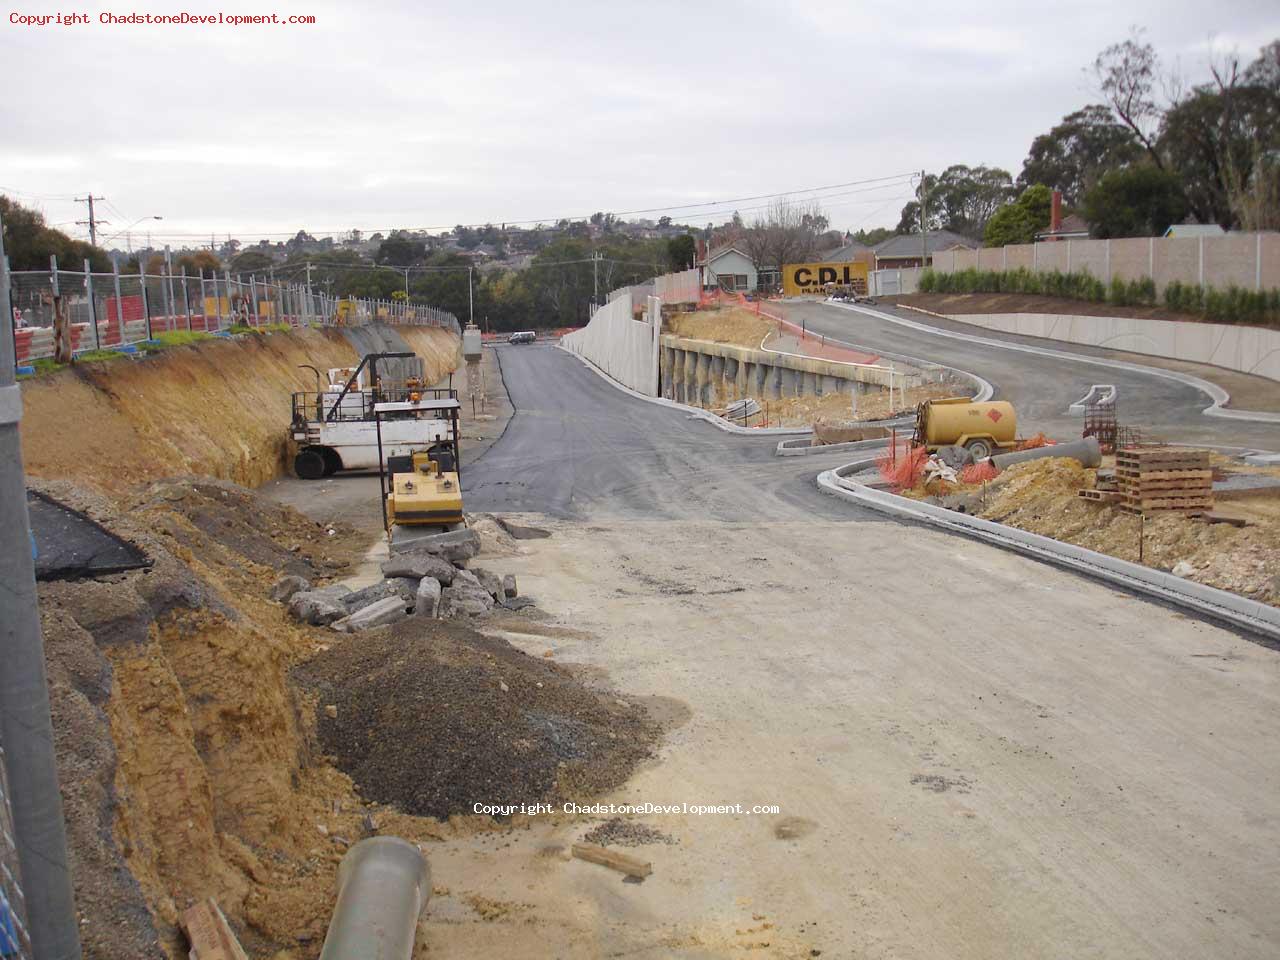 New bitumen almost fully laid along middle rd underpass - Chadstone Development Discussions Gallery